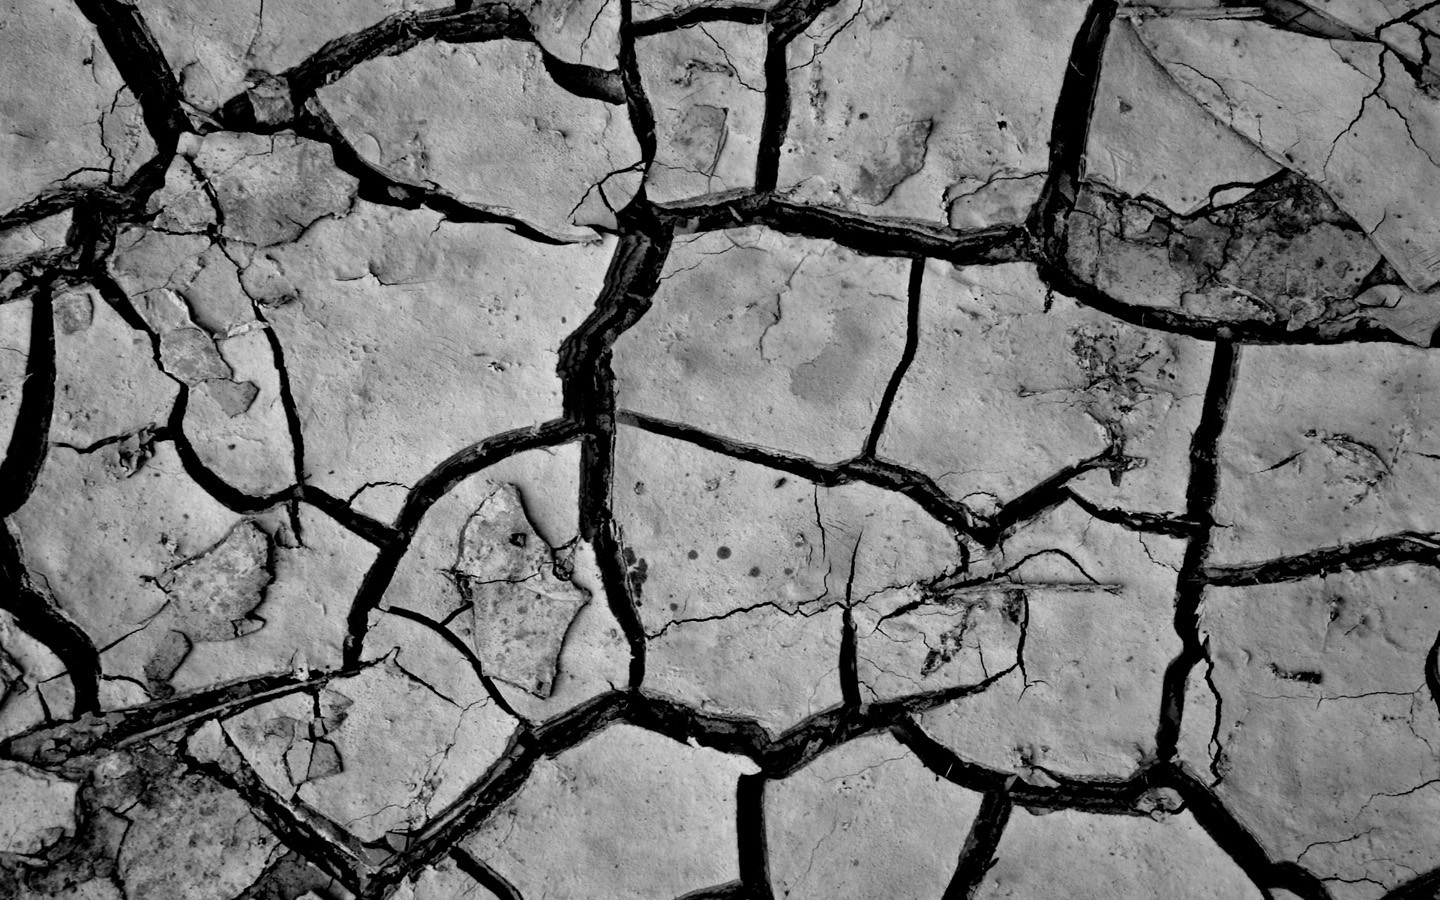 General 1440x900 dry  monochrome texture cracked gray dirt